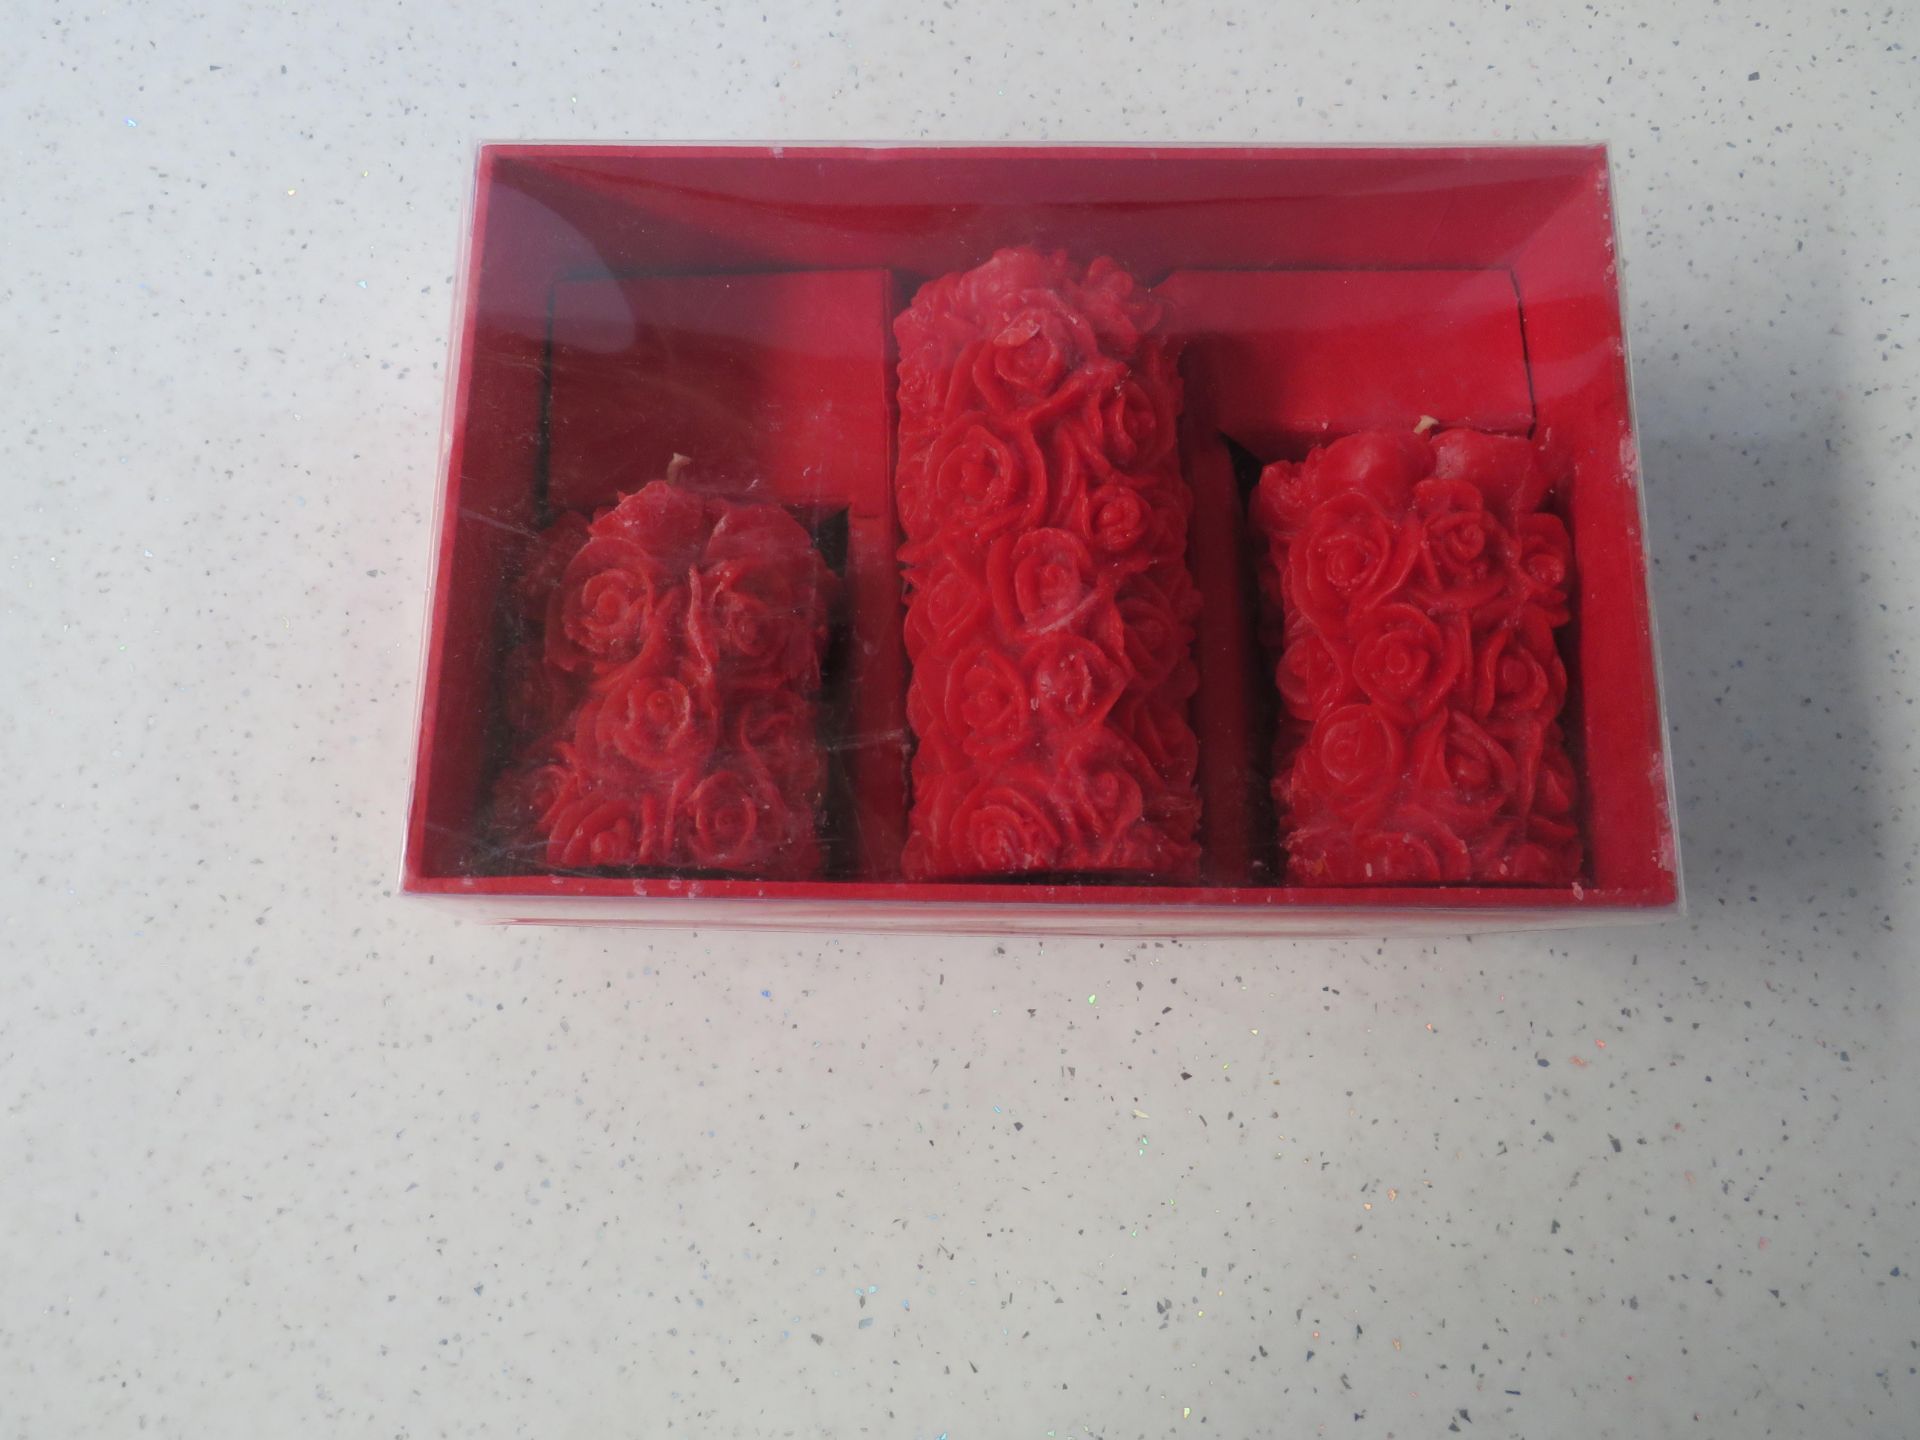 3x Set of 3 Red Rose Pillar Candles - New & Packaged.